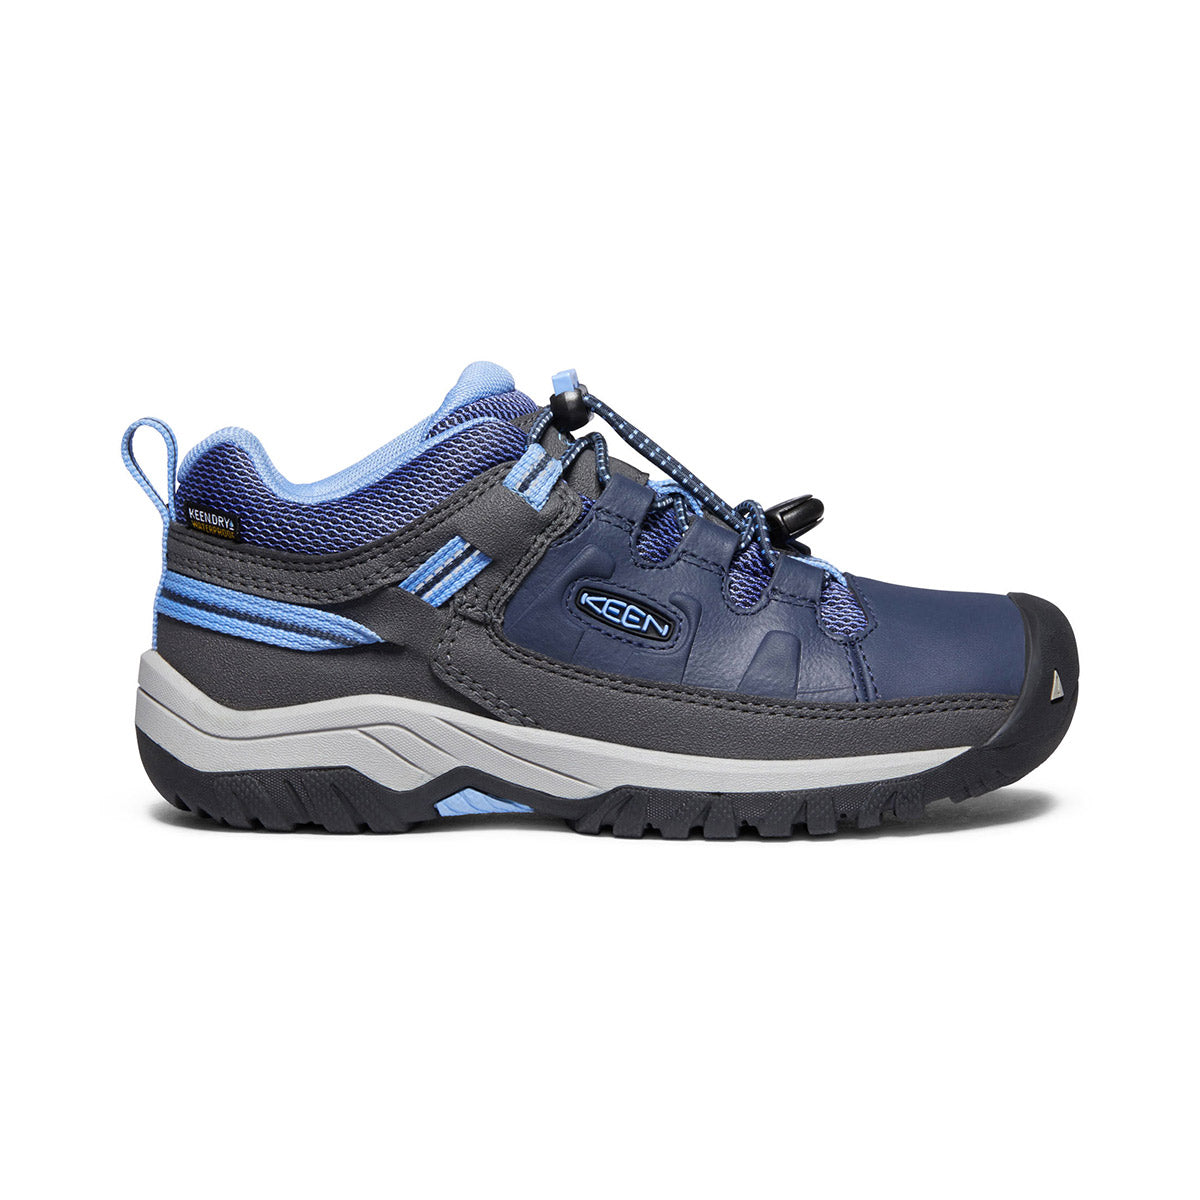 A single blue and gray Keen Targhee Low kid&#39;s hiking shoe with bungee laces on a white background.